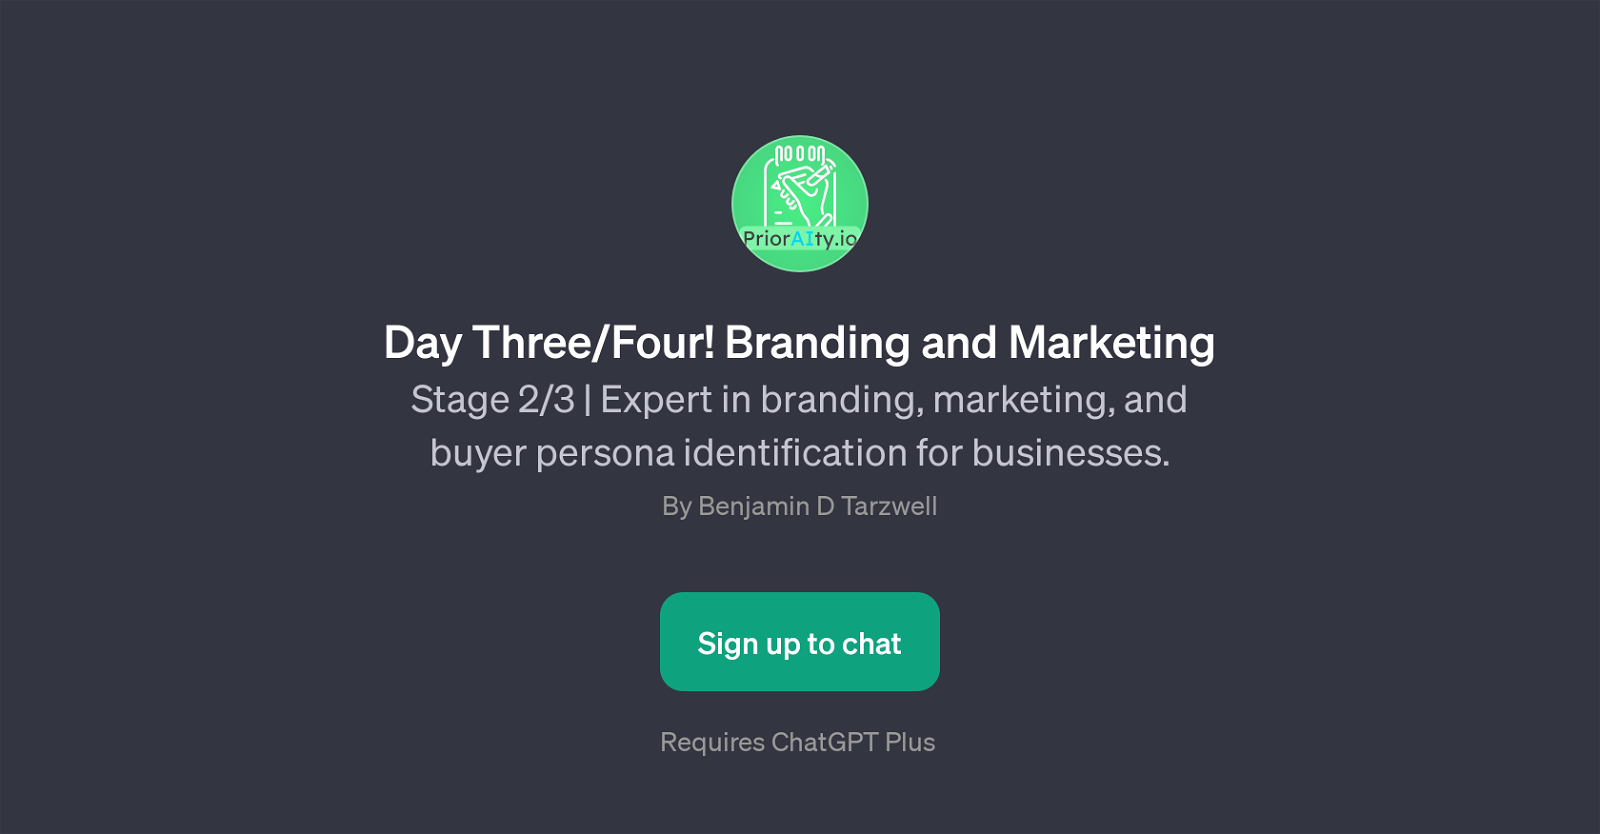 Day Three/Four! Branding and Marketing website